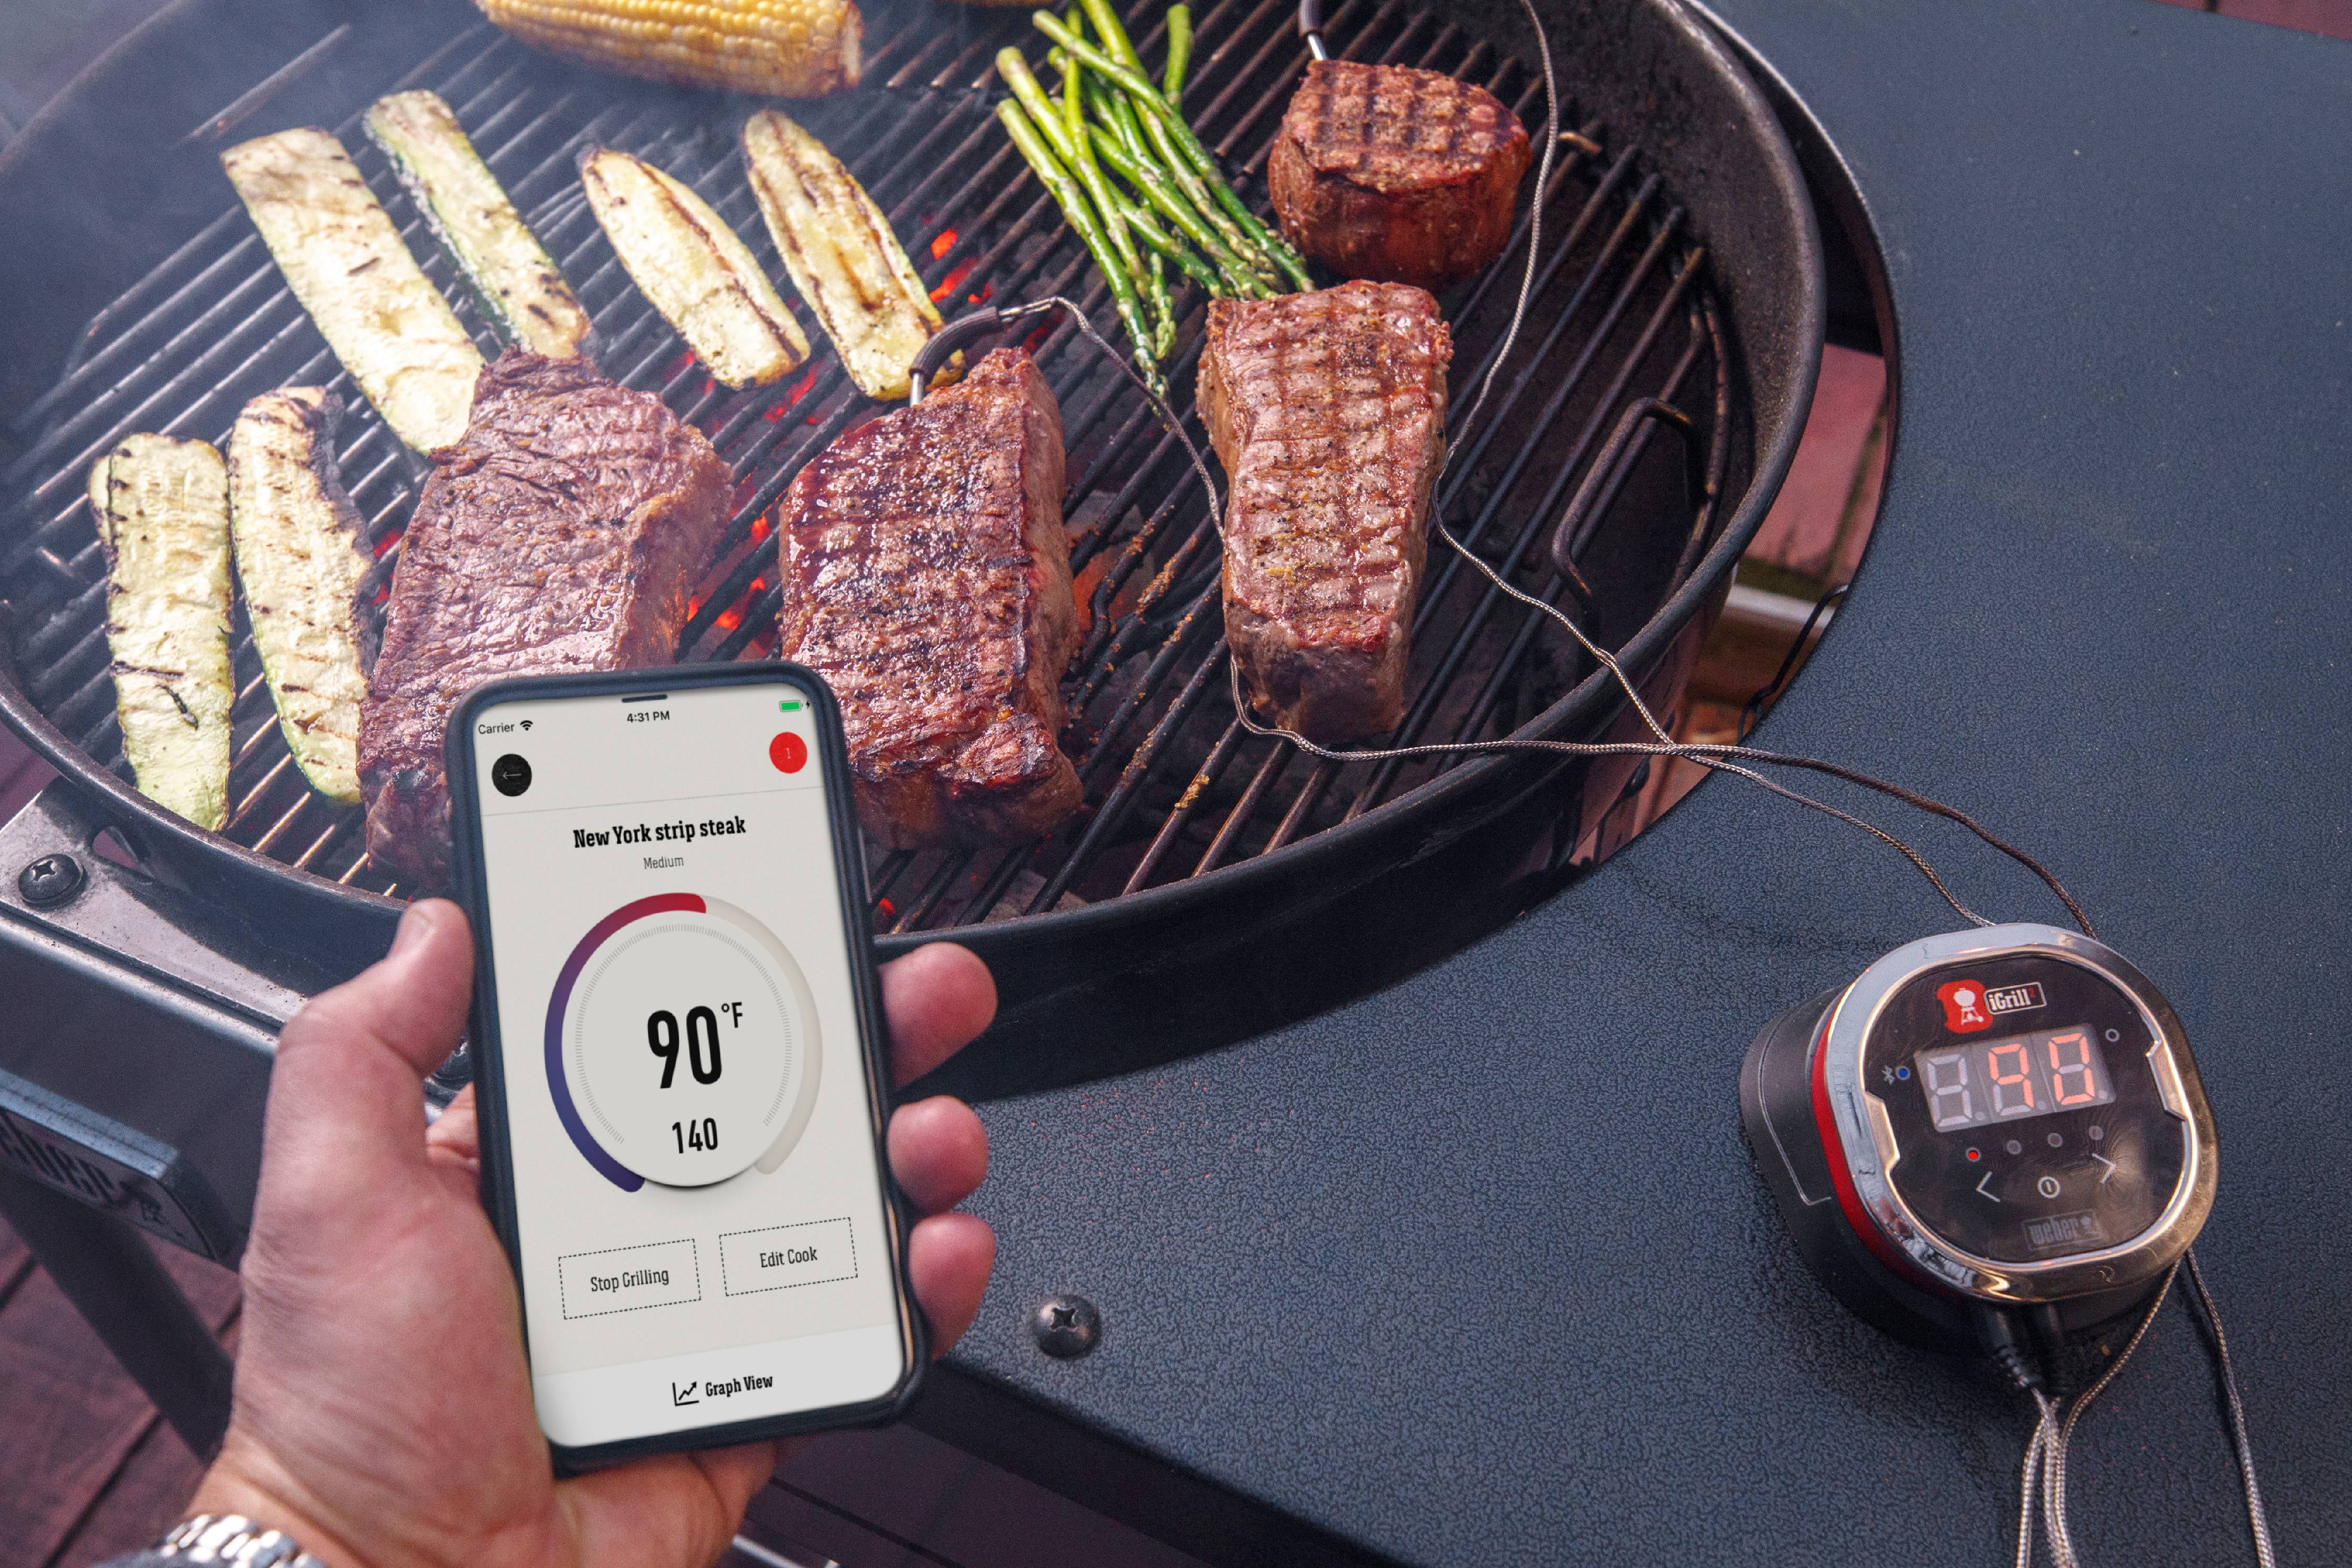 Weber iGrill 2 Instant Digital Smart Thermometer + Reviews